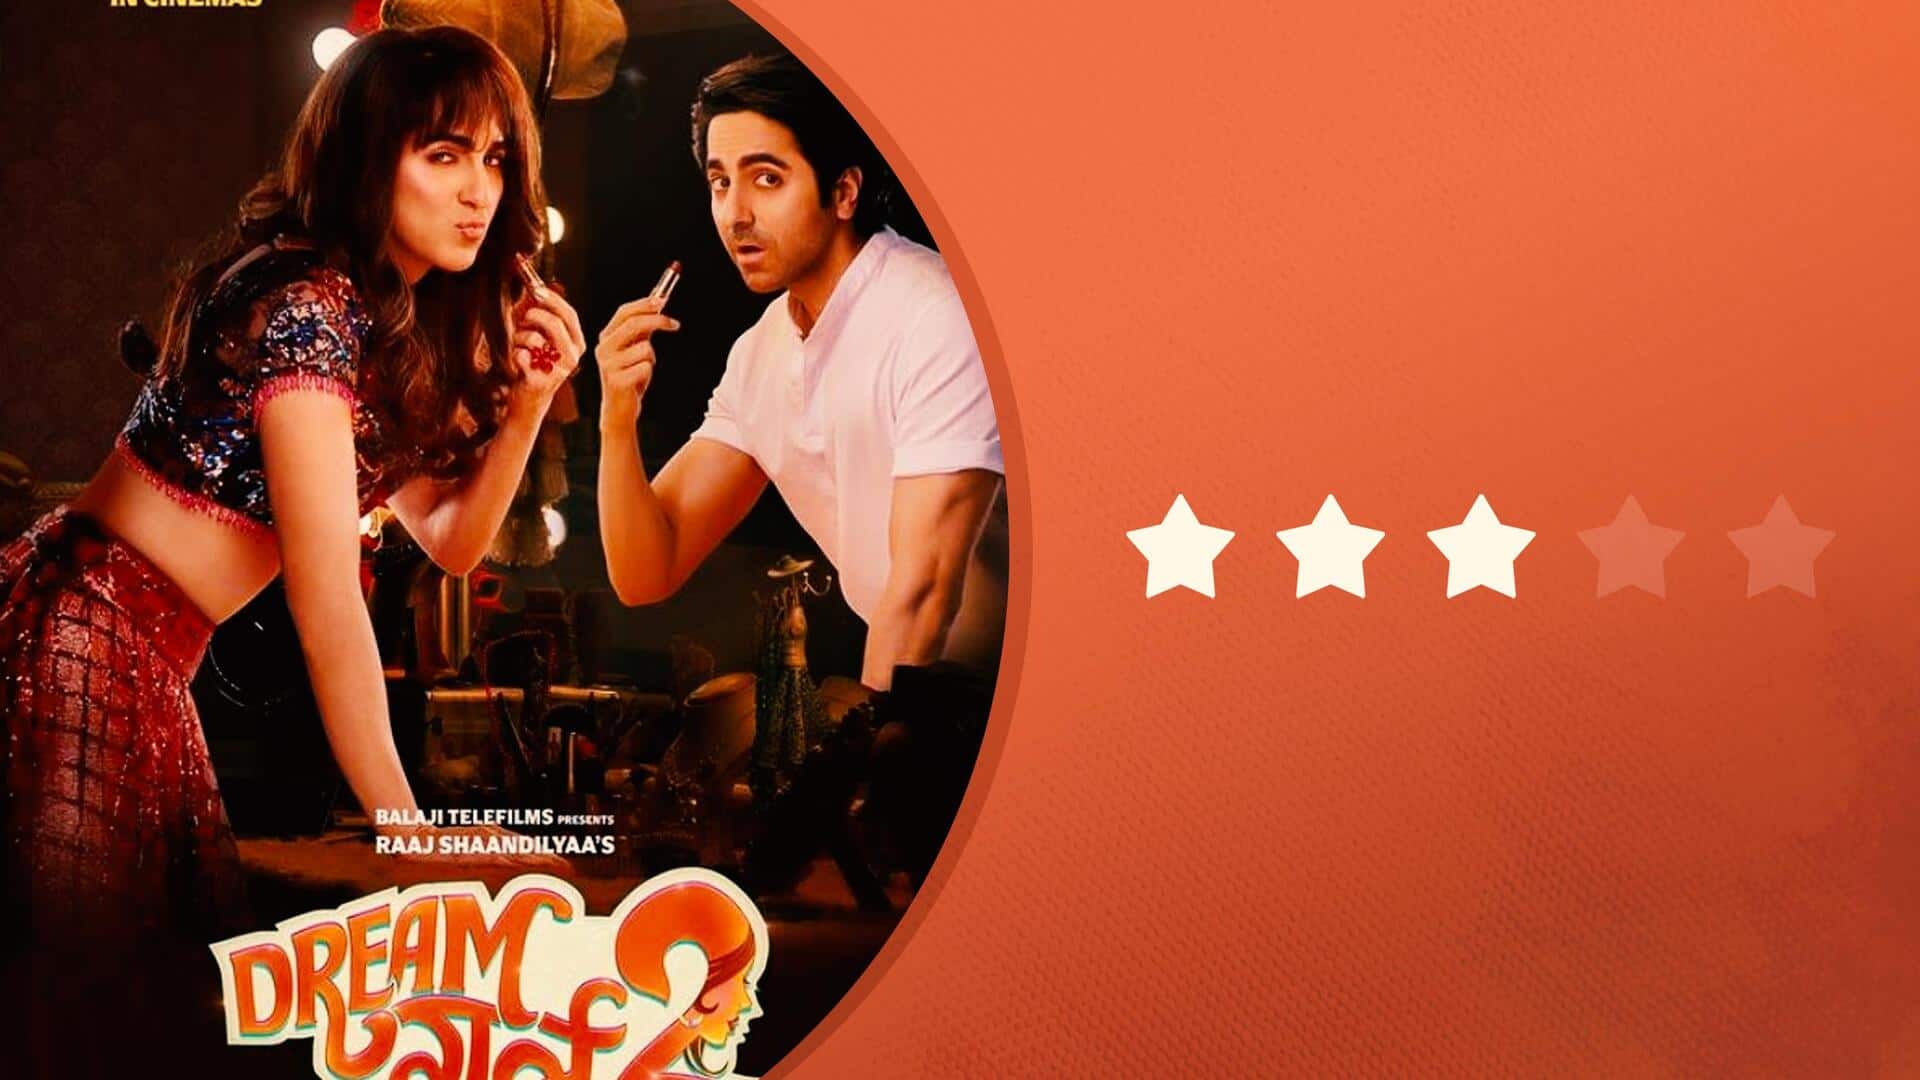 #DreamGirl2 review: Wholesome entertainer thrives on performances and one-liners